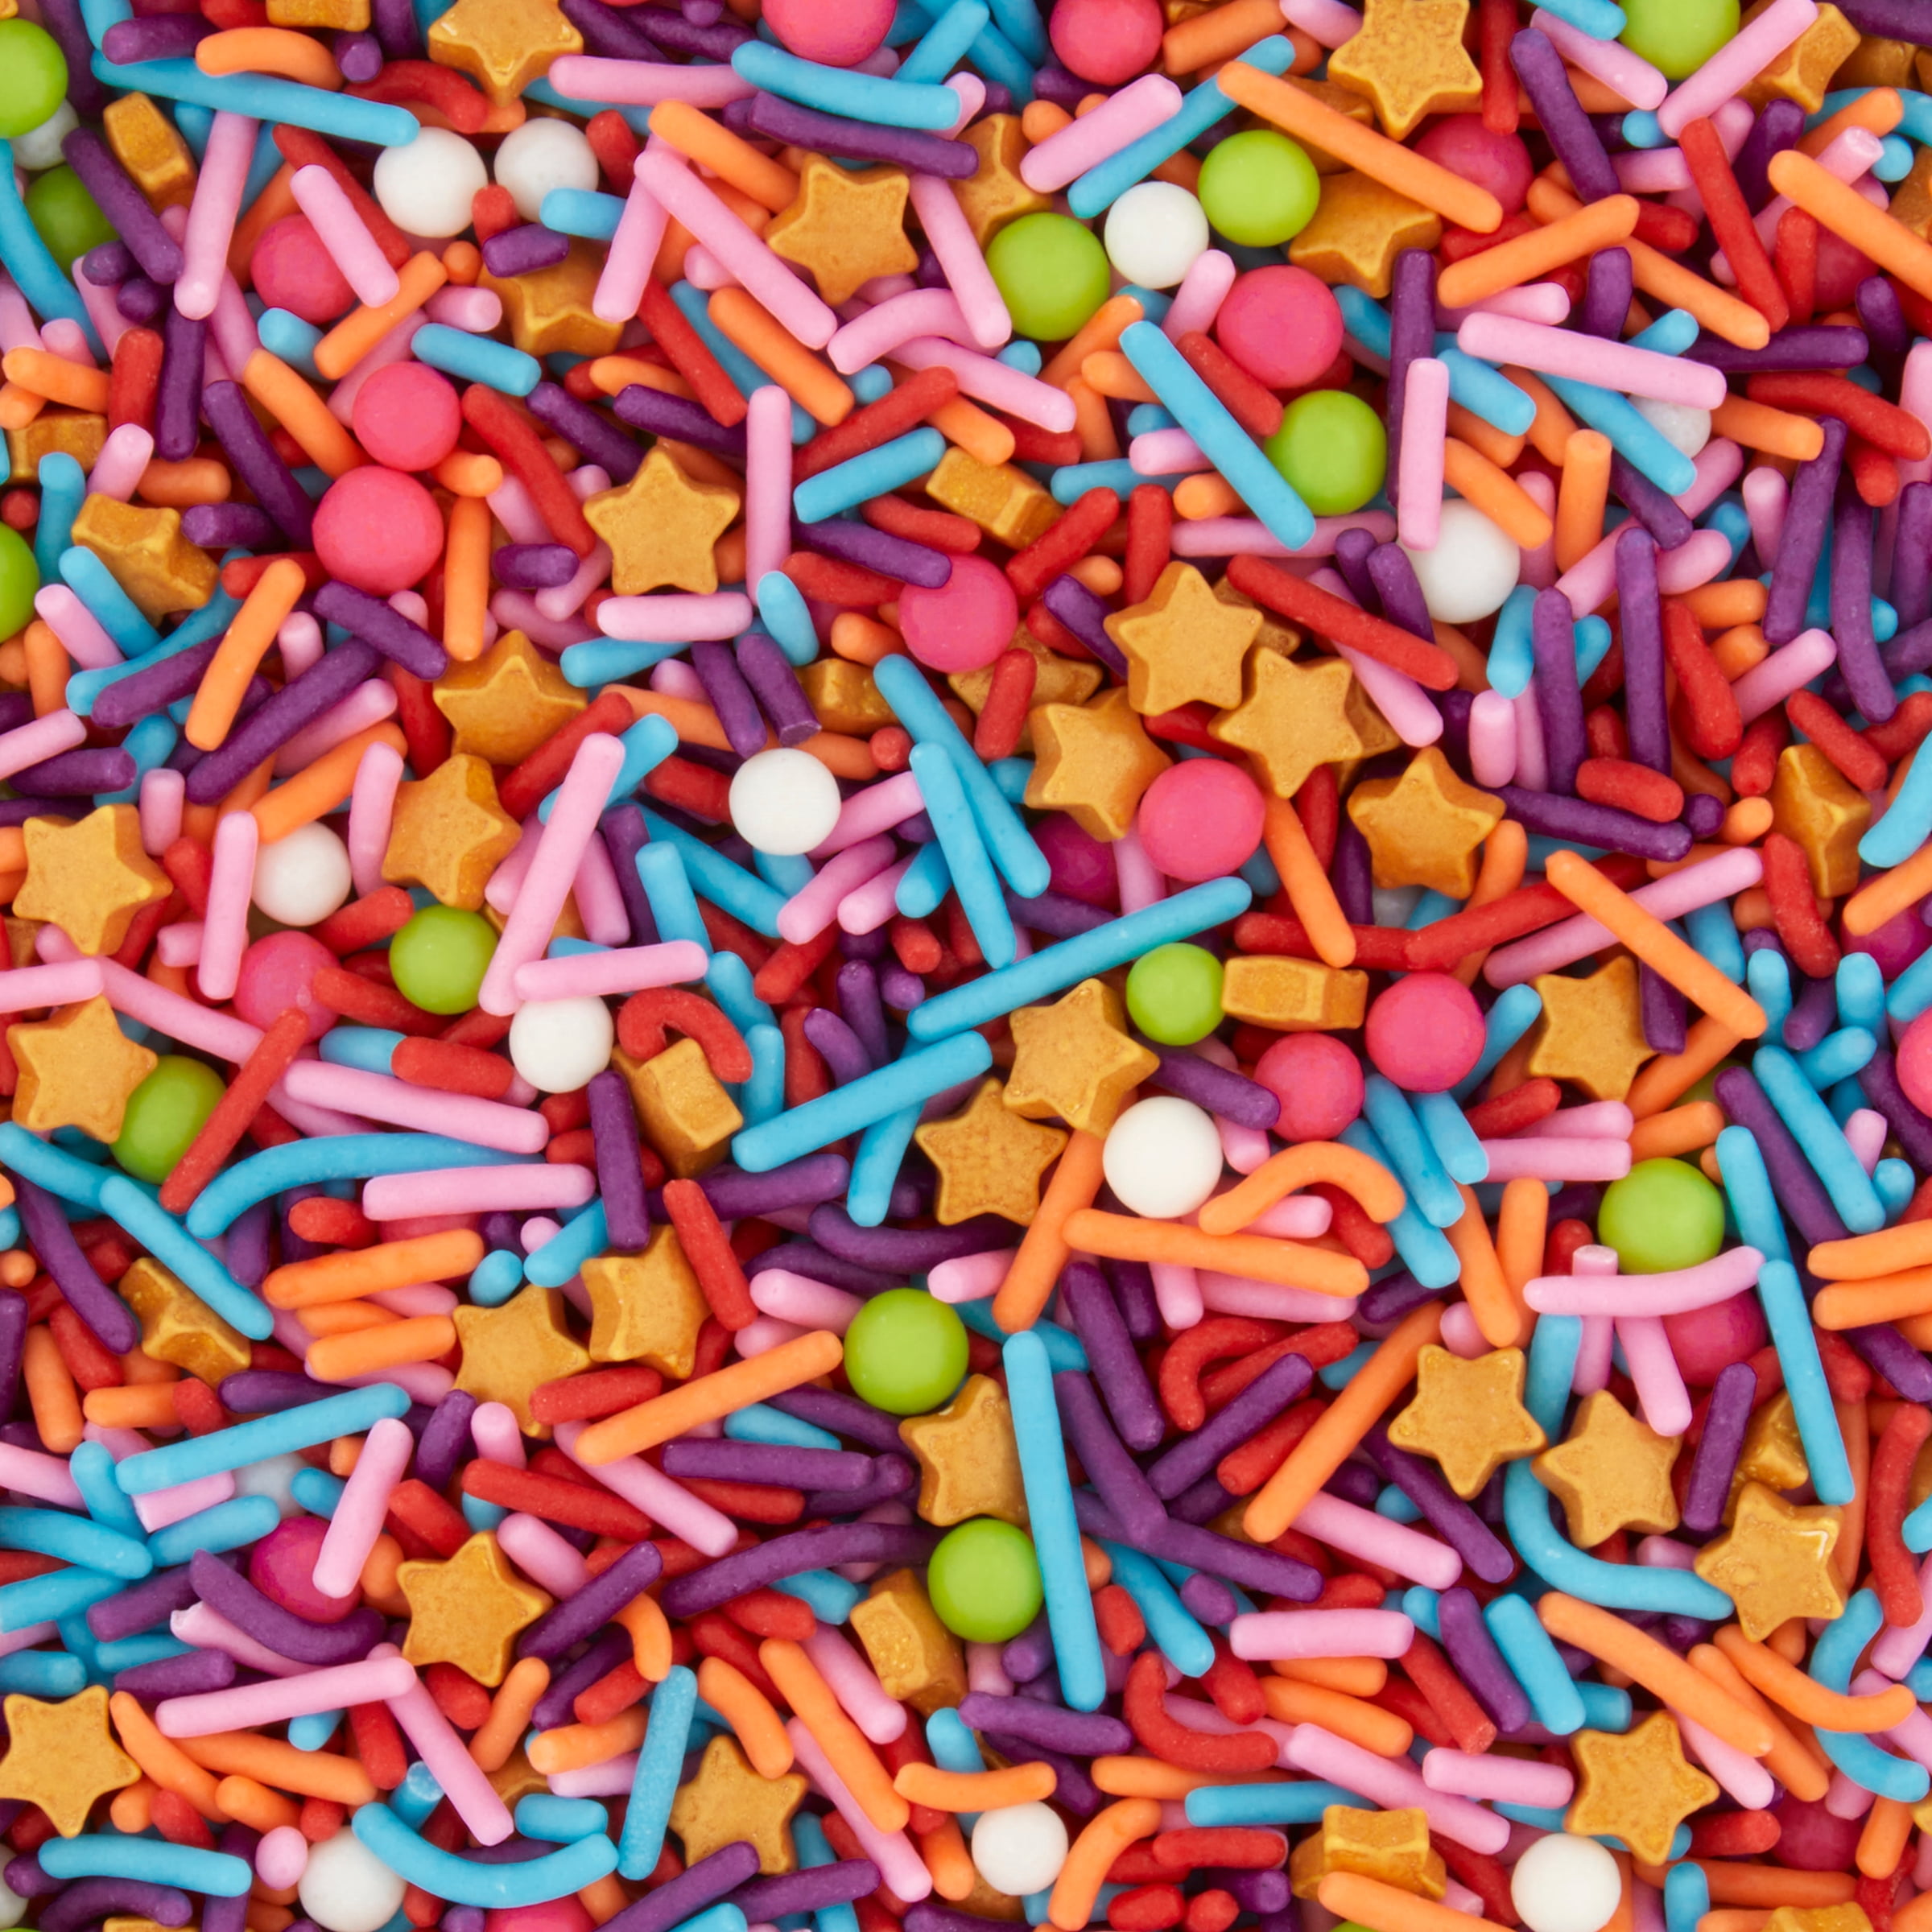 Great Value Sprinkles Mix Tub for Desserts, Candies, Jimmies and Pearls,  10.48 oz., Assorted Colors